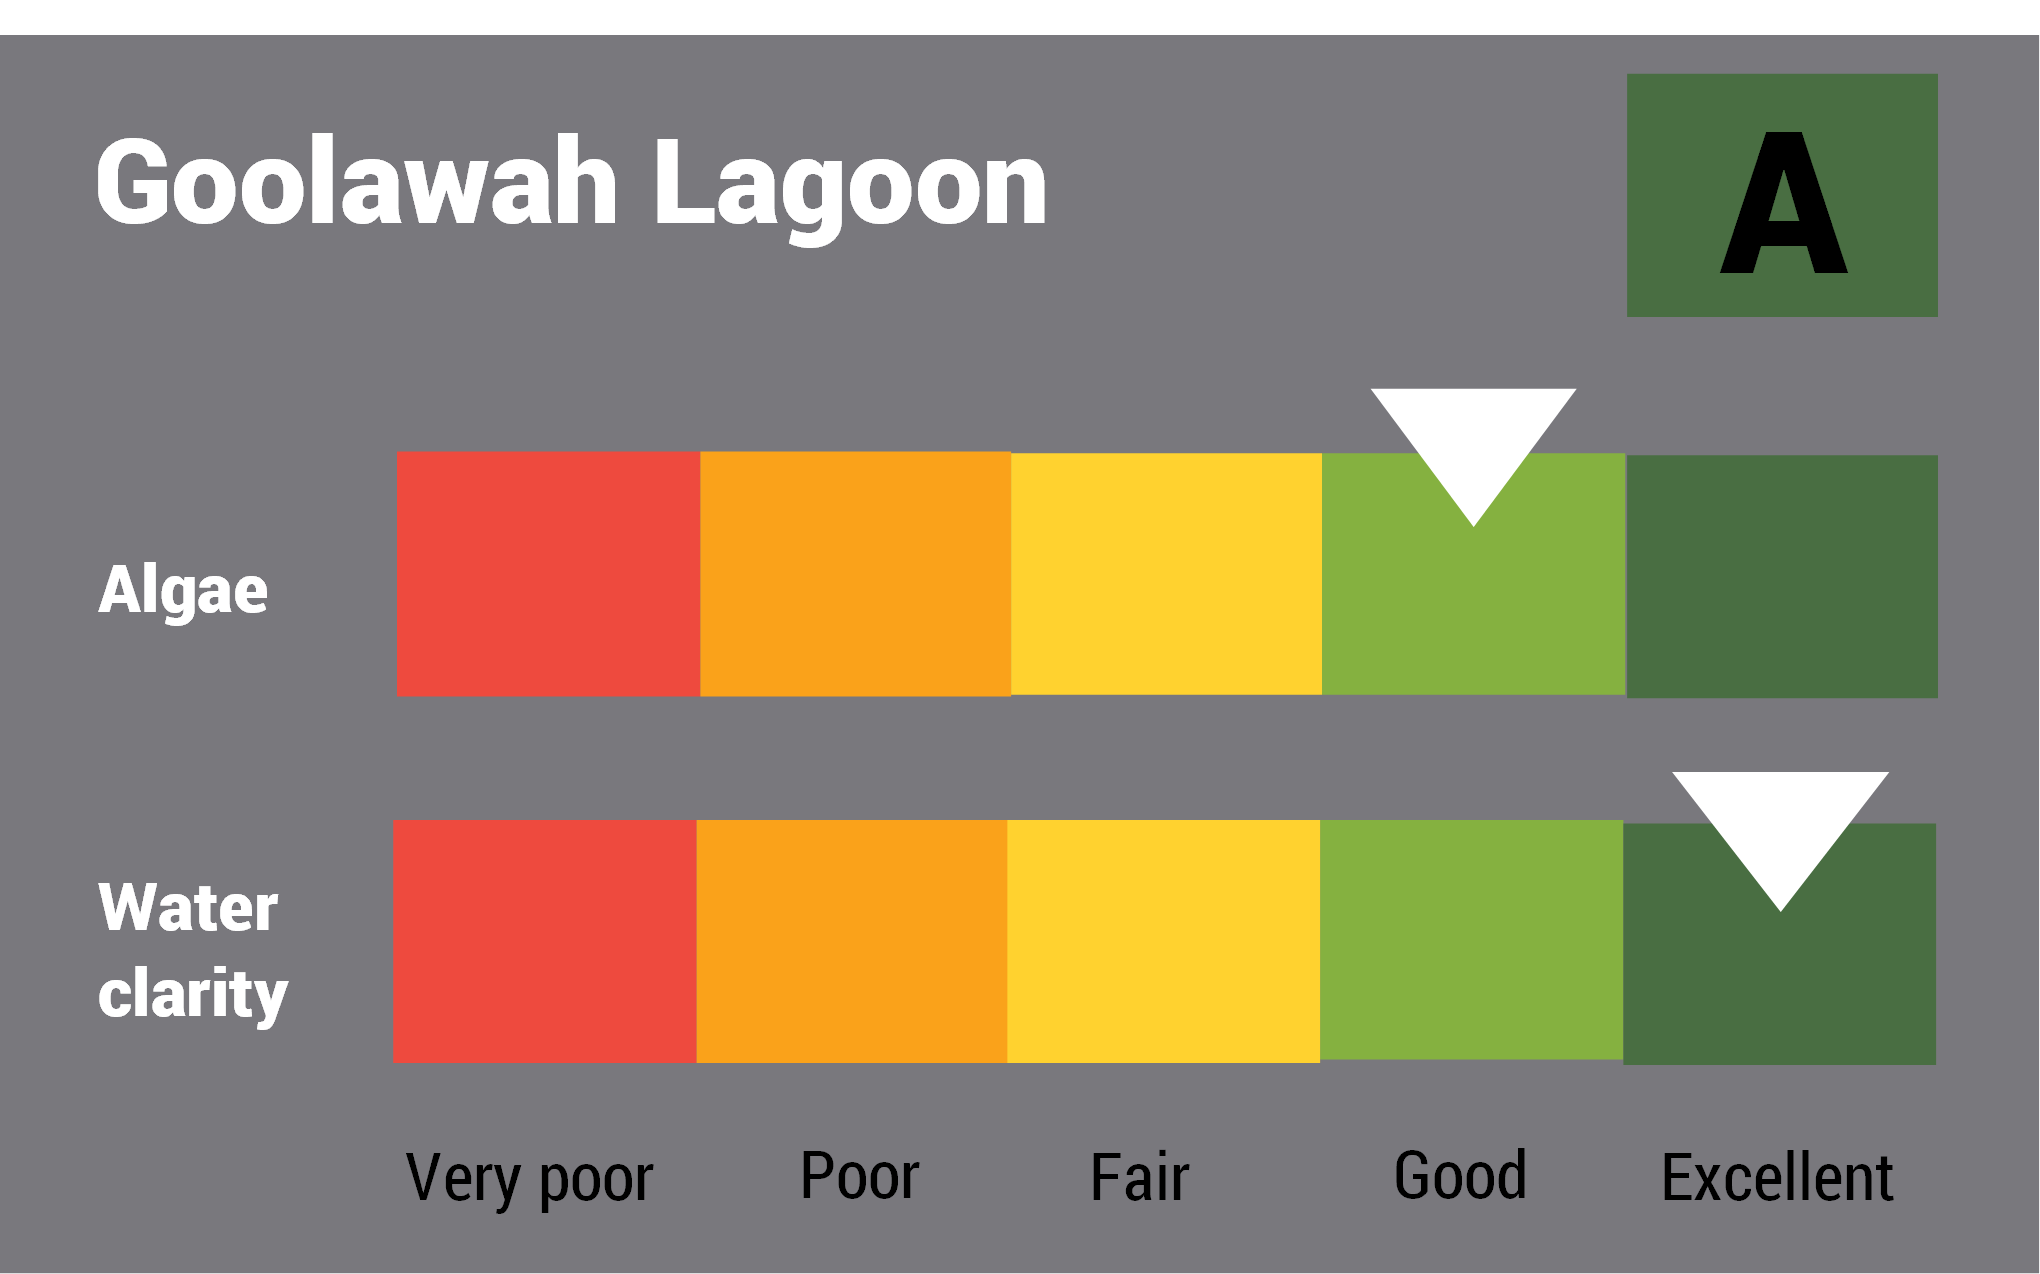 Goolawah Lagoon water quality report card for algae and water clarity showing colour-coded ratings (red, orange, yellow, light green and dark green, which represent very poor, poor, fair, good and excellent, respectively). Algae is rated 'good' and water clarity is rated 'excellent' giving an overall rating of 'excellent' or 'A'.